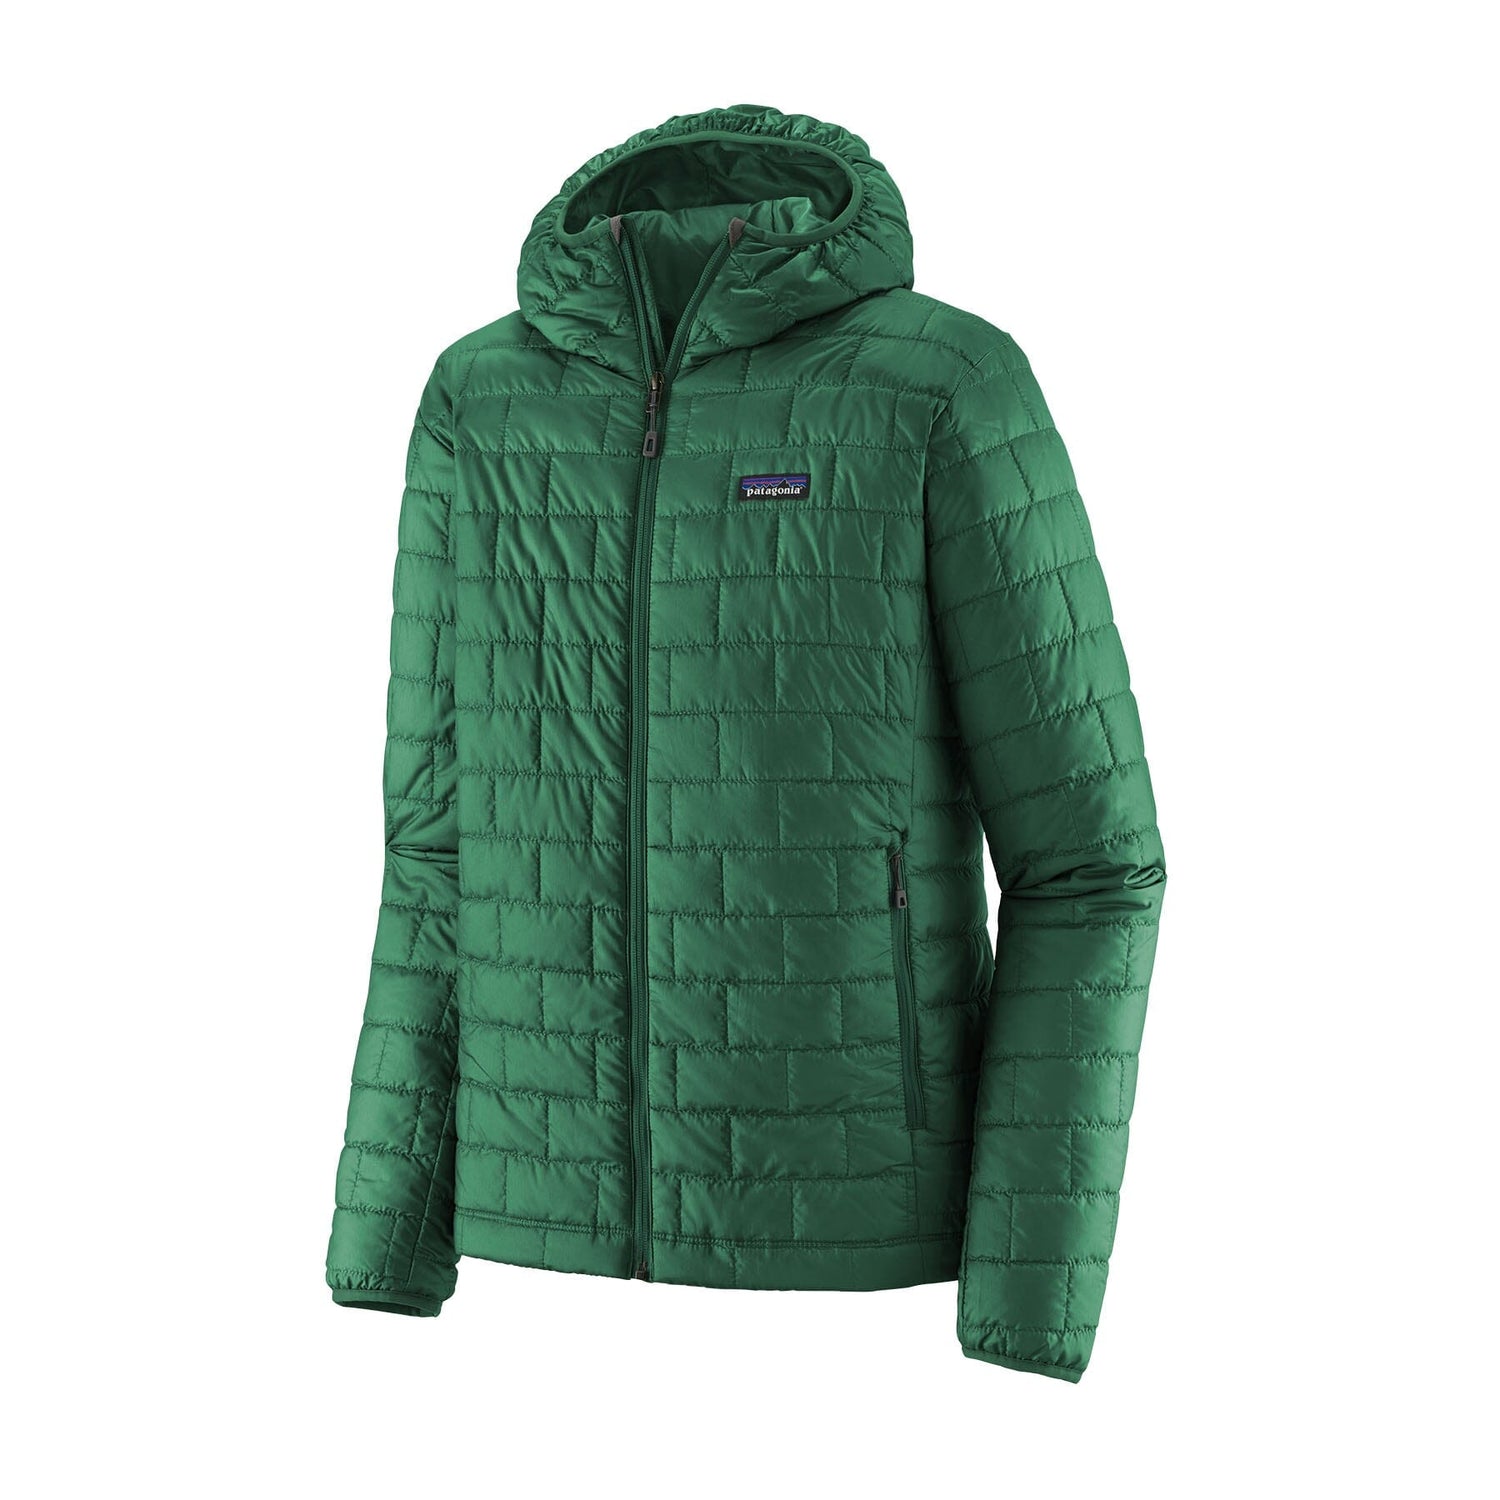 Patagonia - M's Nano Puff Hoody - 100% Recycled Polyester - Weekendbee - sustainable sportswear